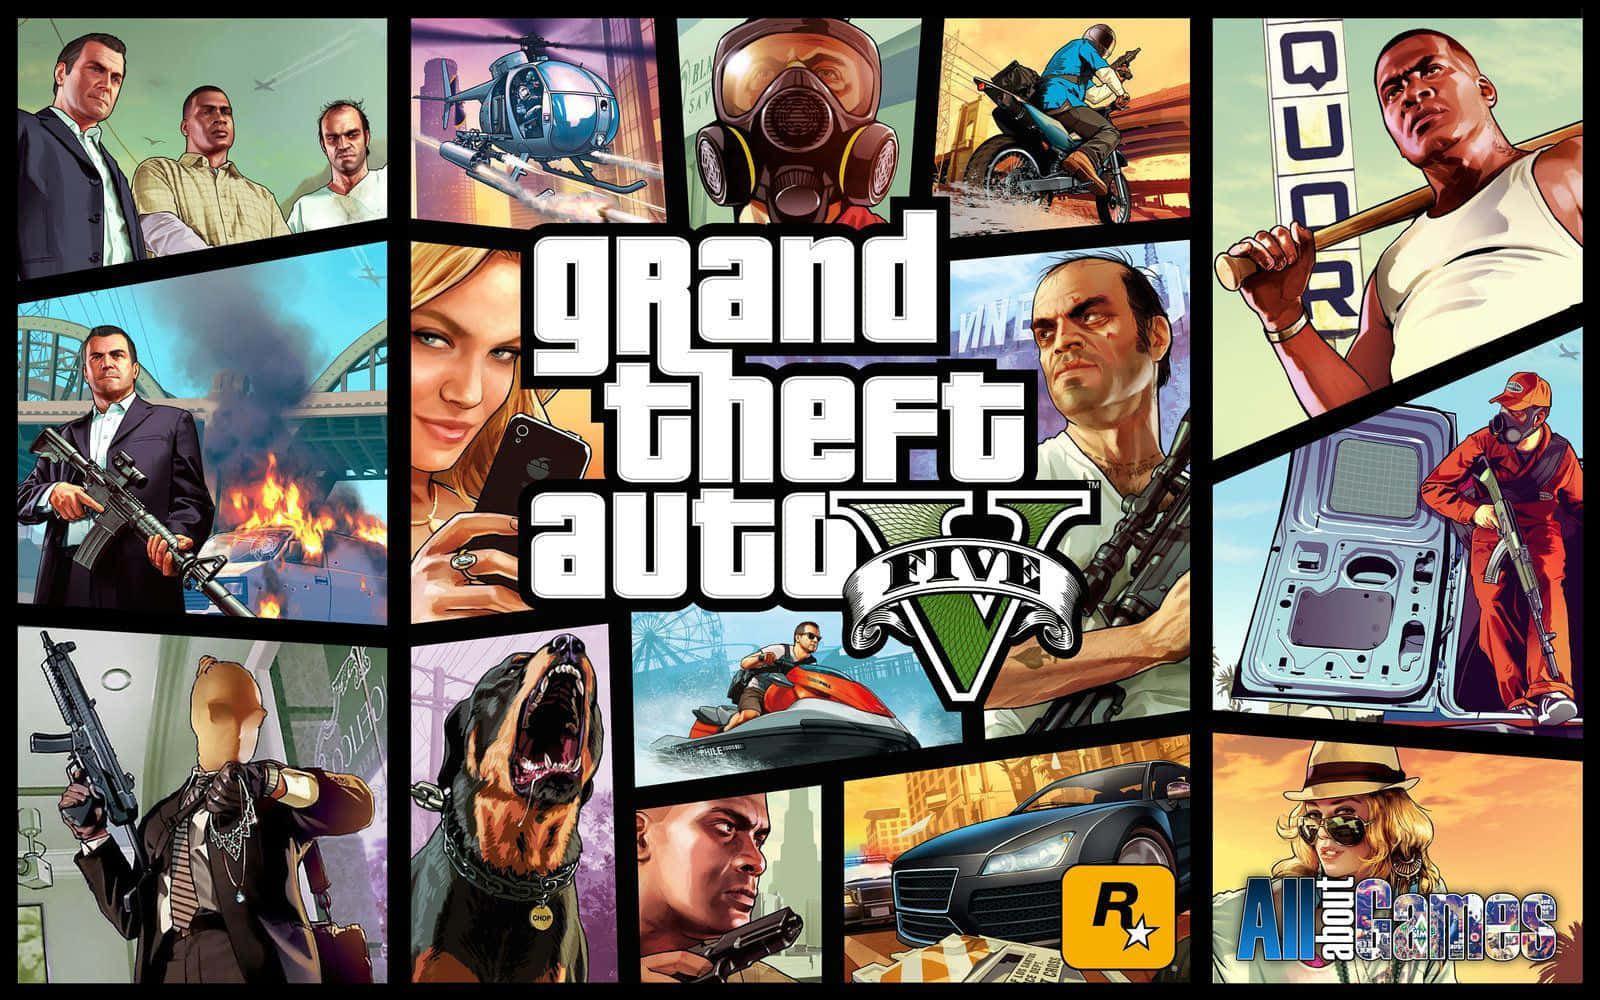 Experience the action-filled adventure of Grand Theft Auto V on Desktop Wallpaper